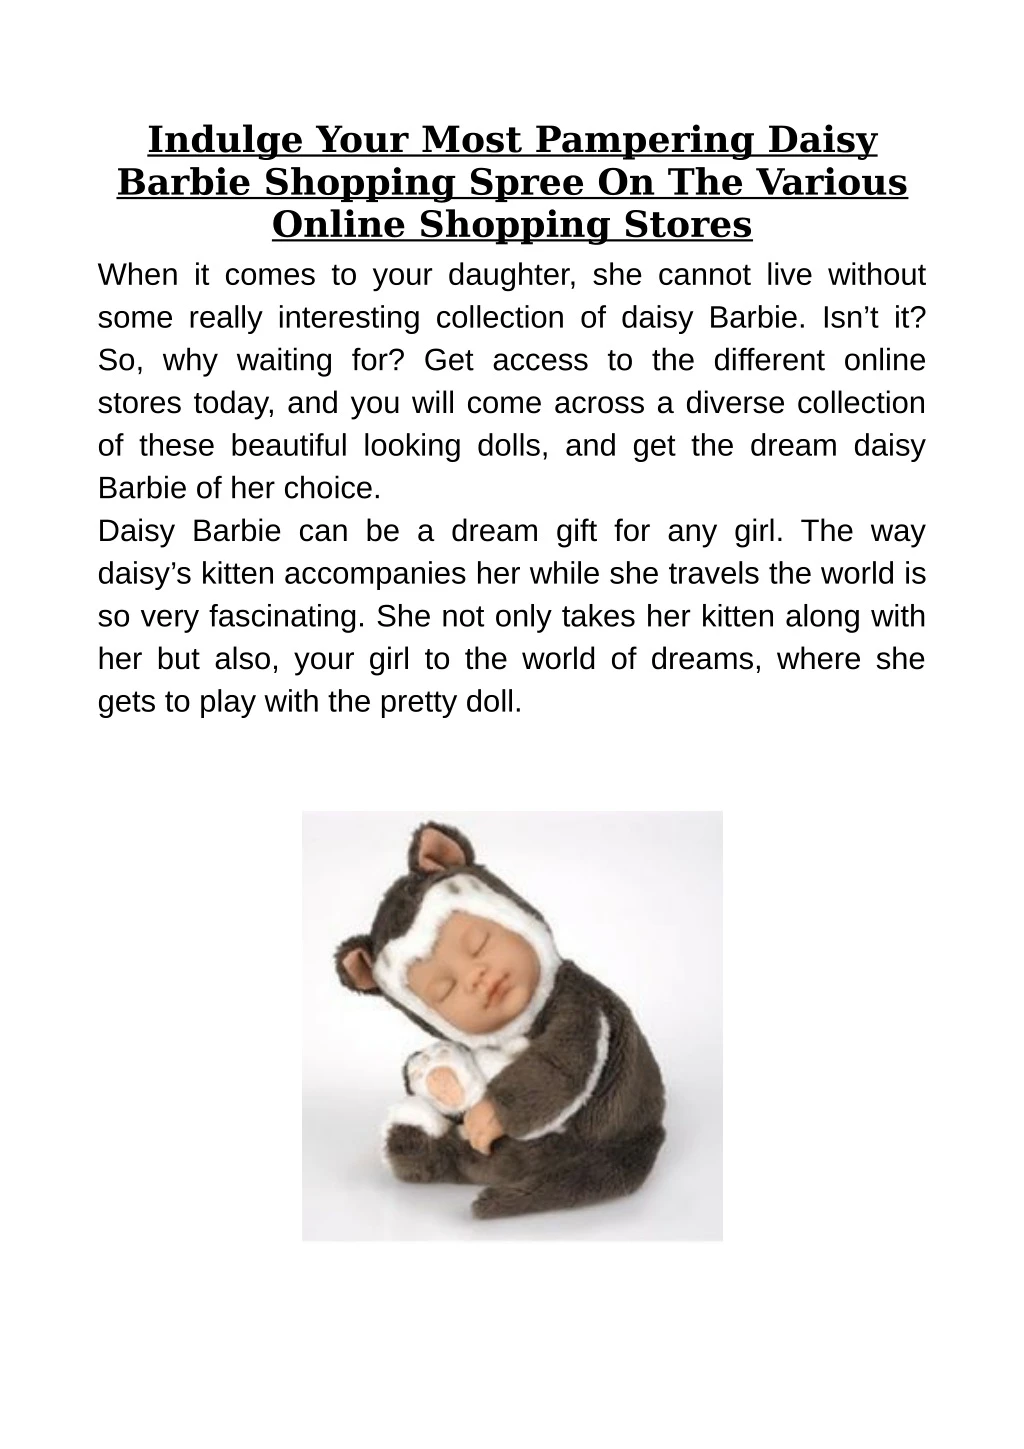 indulge your most pampering daisy barbie shopping